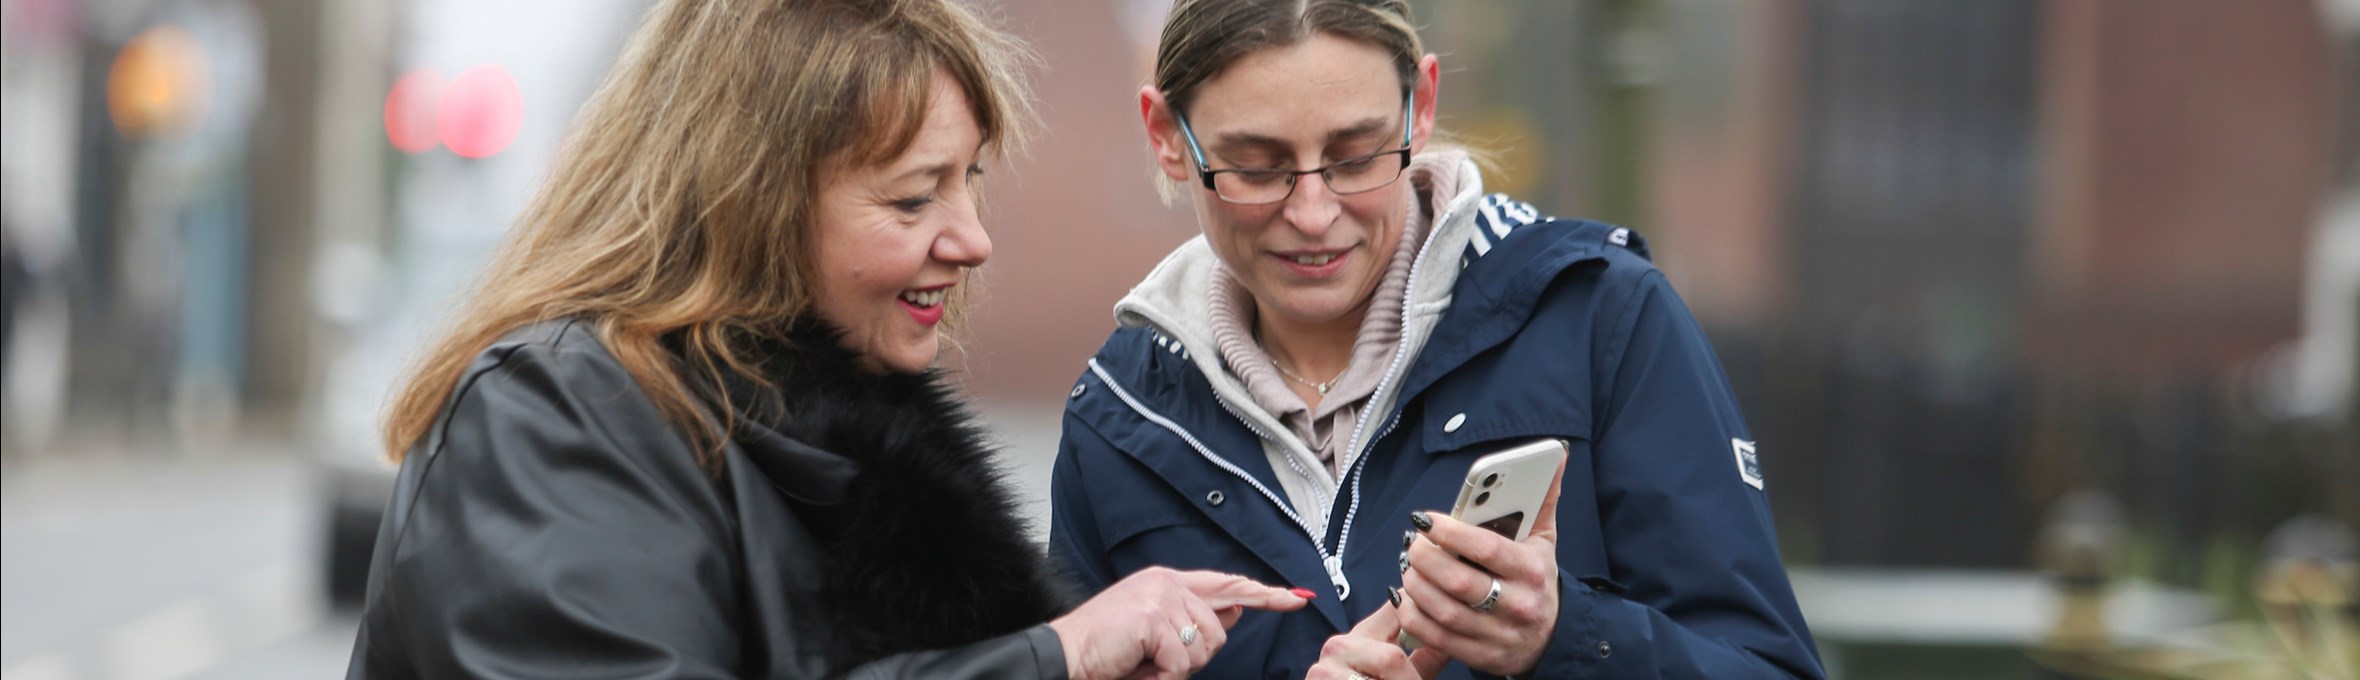 Police and Crime Commissioner and Cllr Helen-Ann Smith looking at a mobile phone 